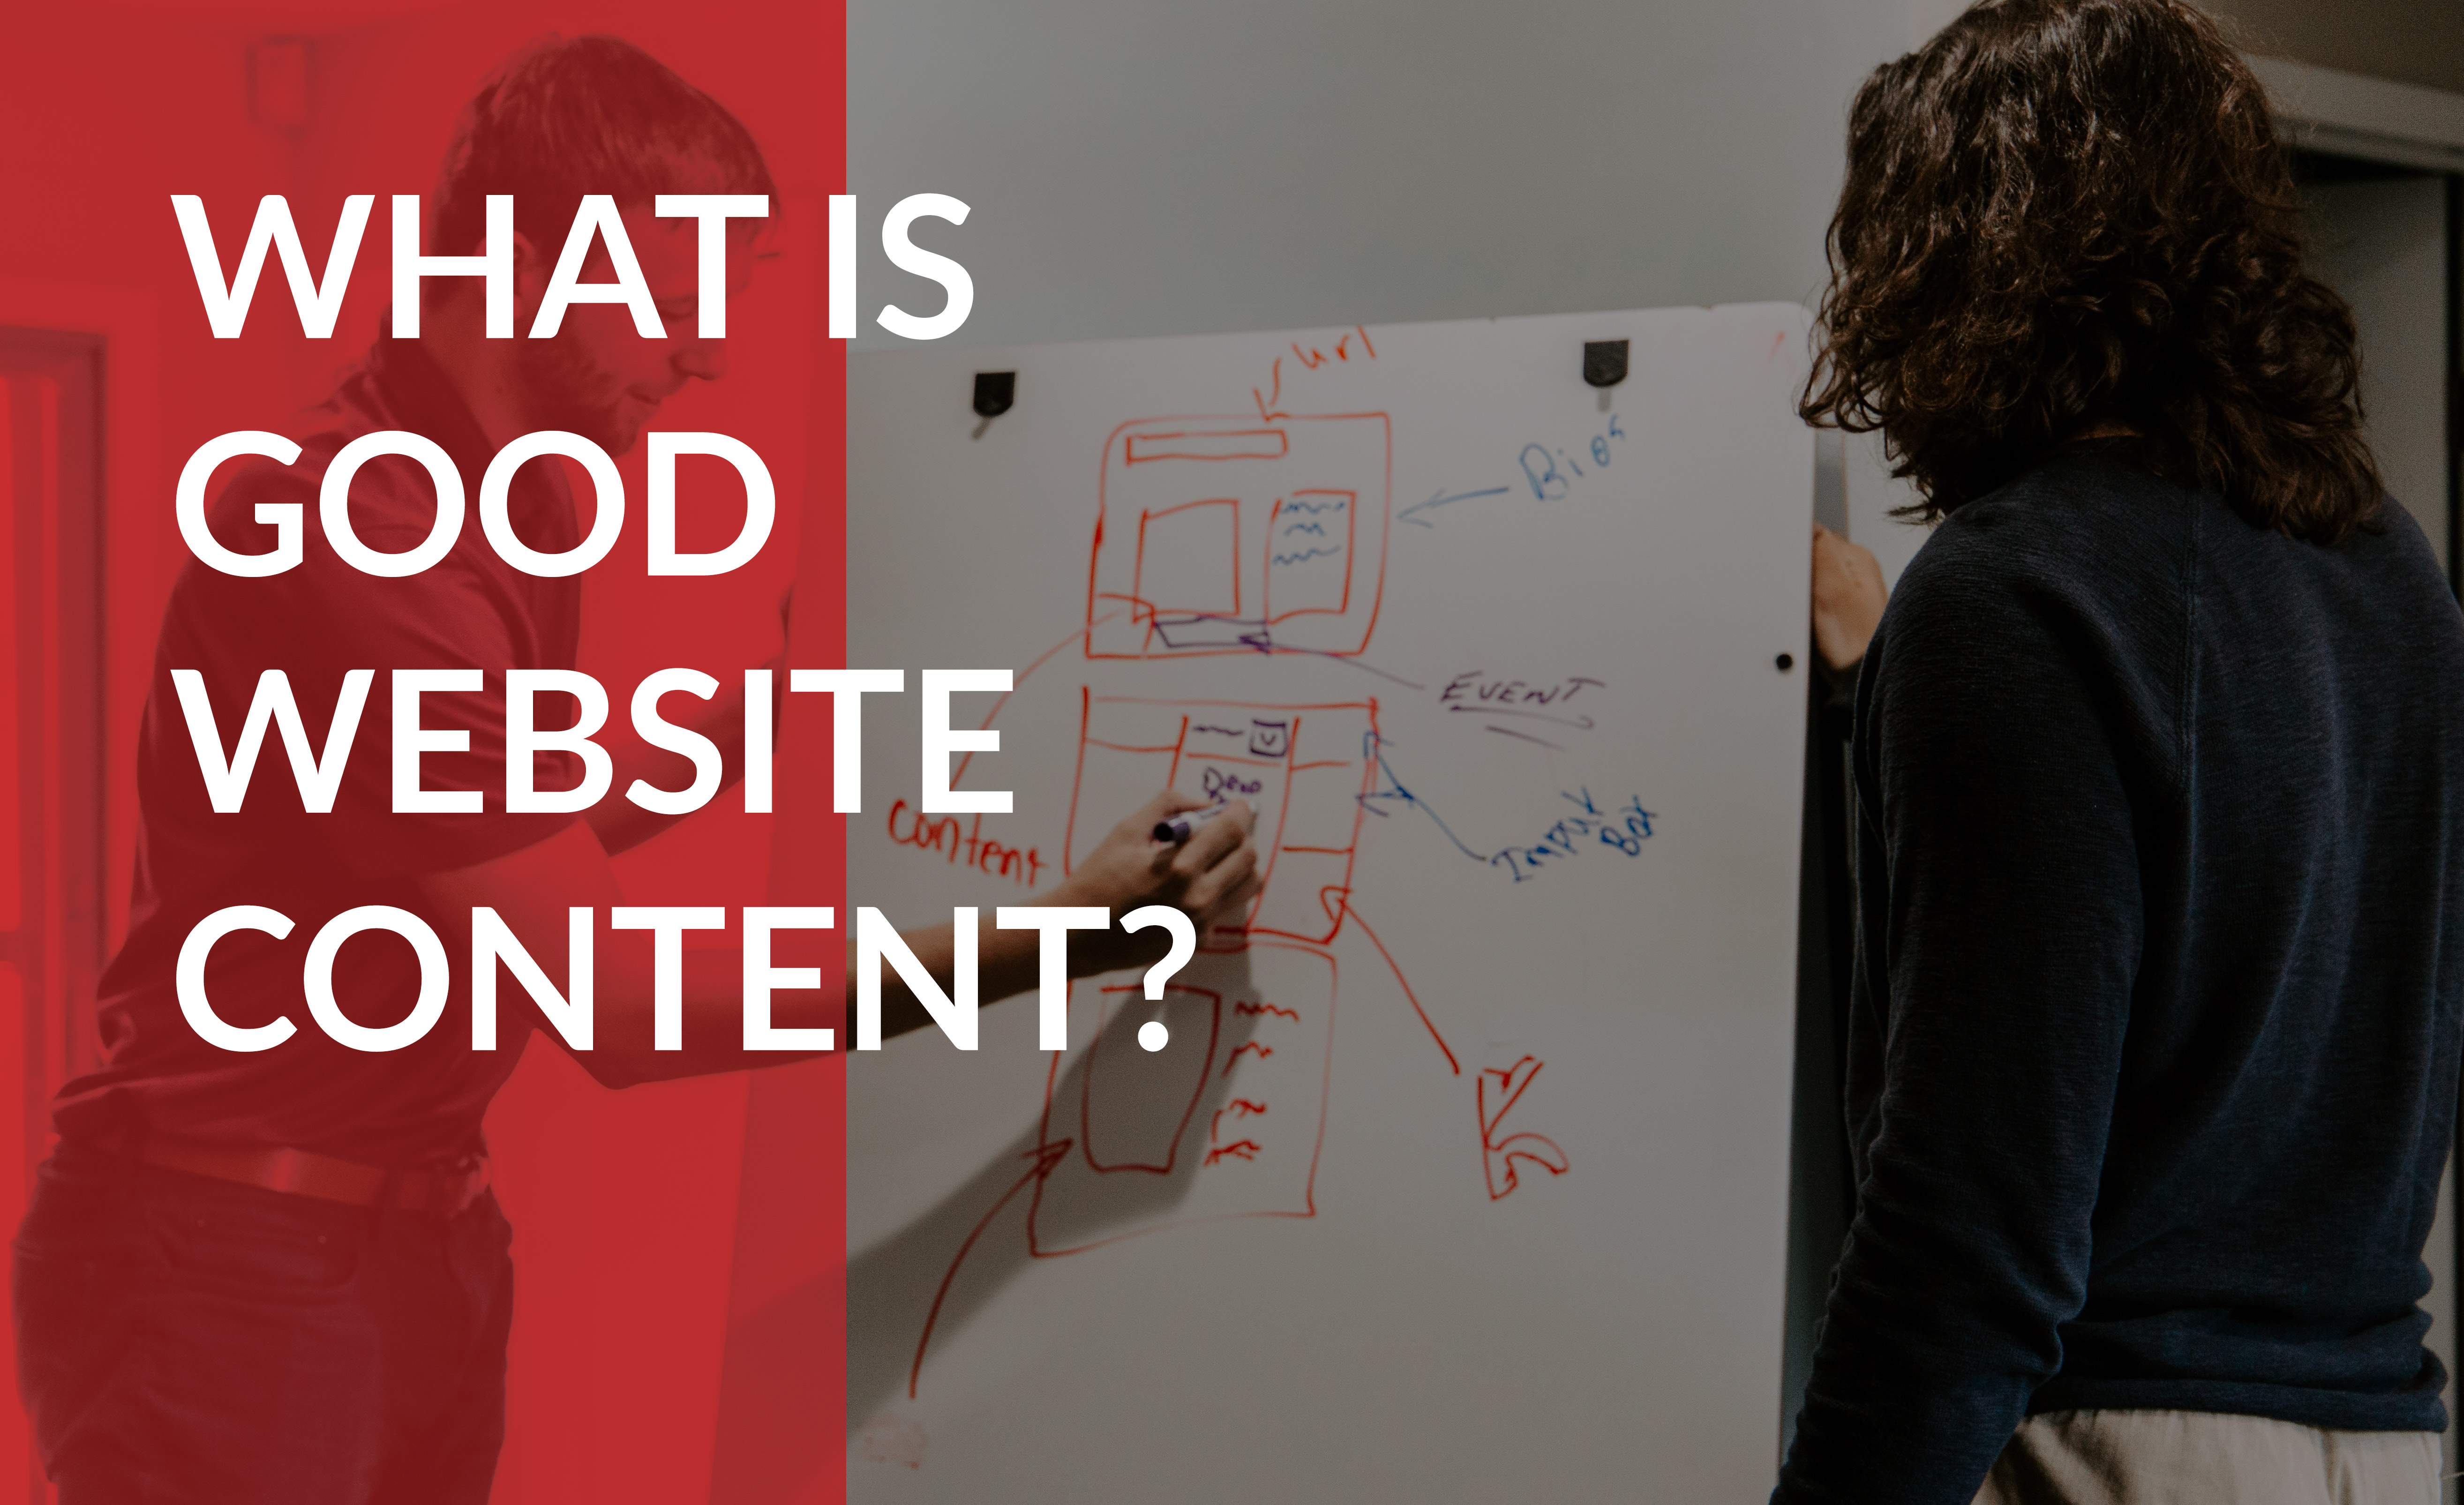 Exploring what makes for good website content.